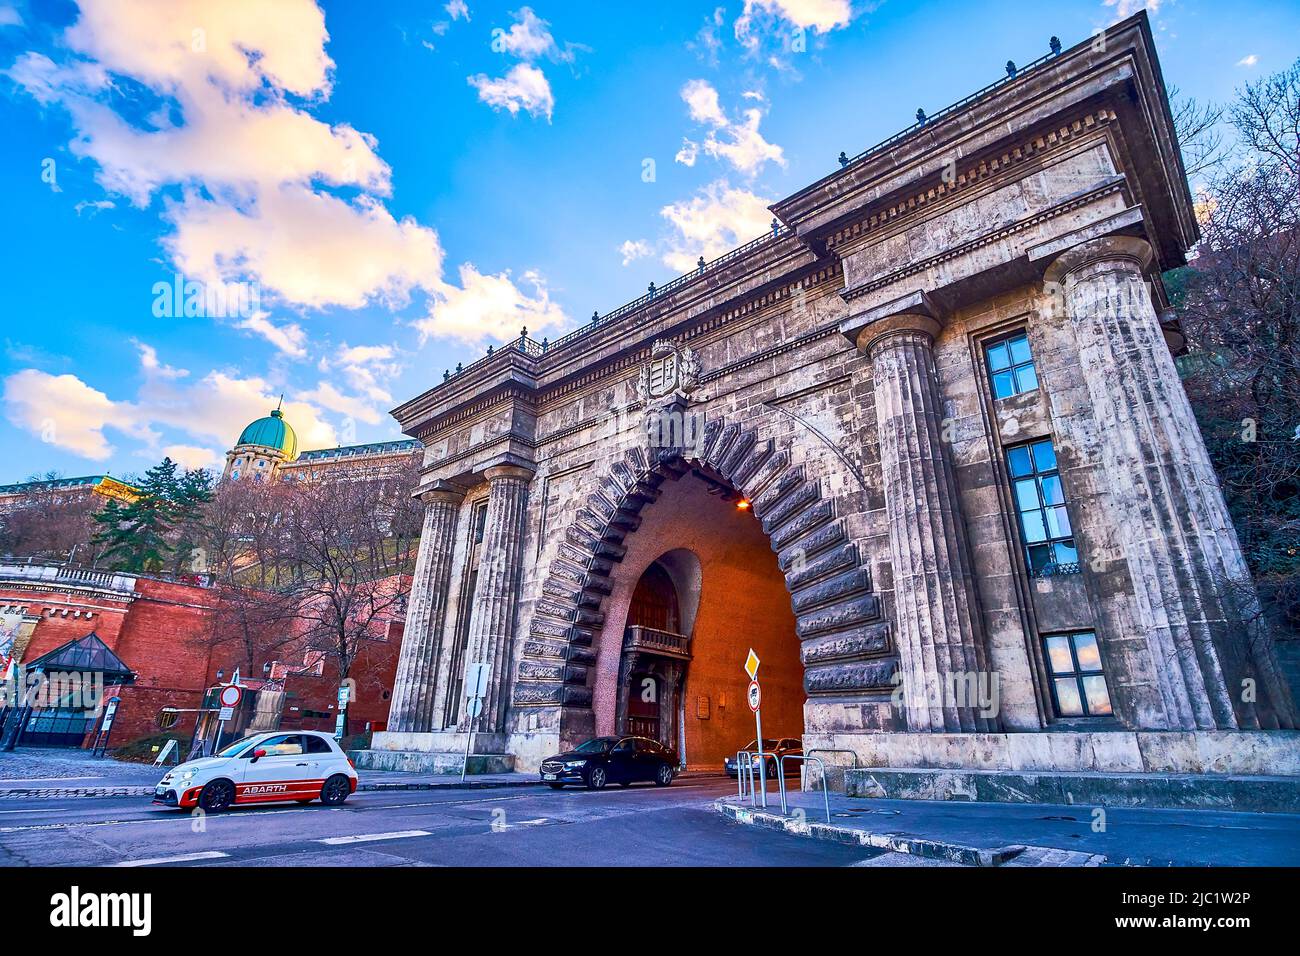 BUDAPEST, HUNGARY - FEBRUARY 23, 2022: The cars drive through the Tunnel, under the Castle Hill in Buda, on February 23 in Budapest, Hungary Stock Photo